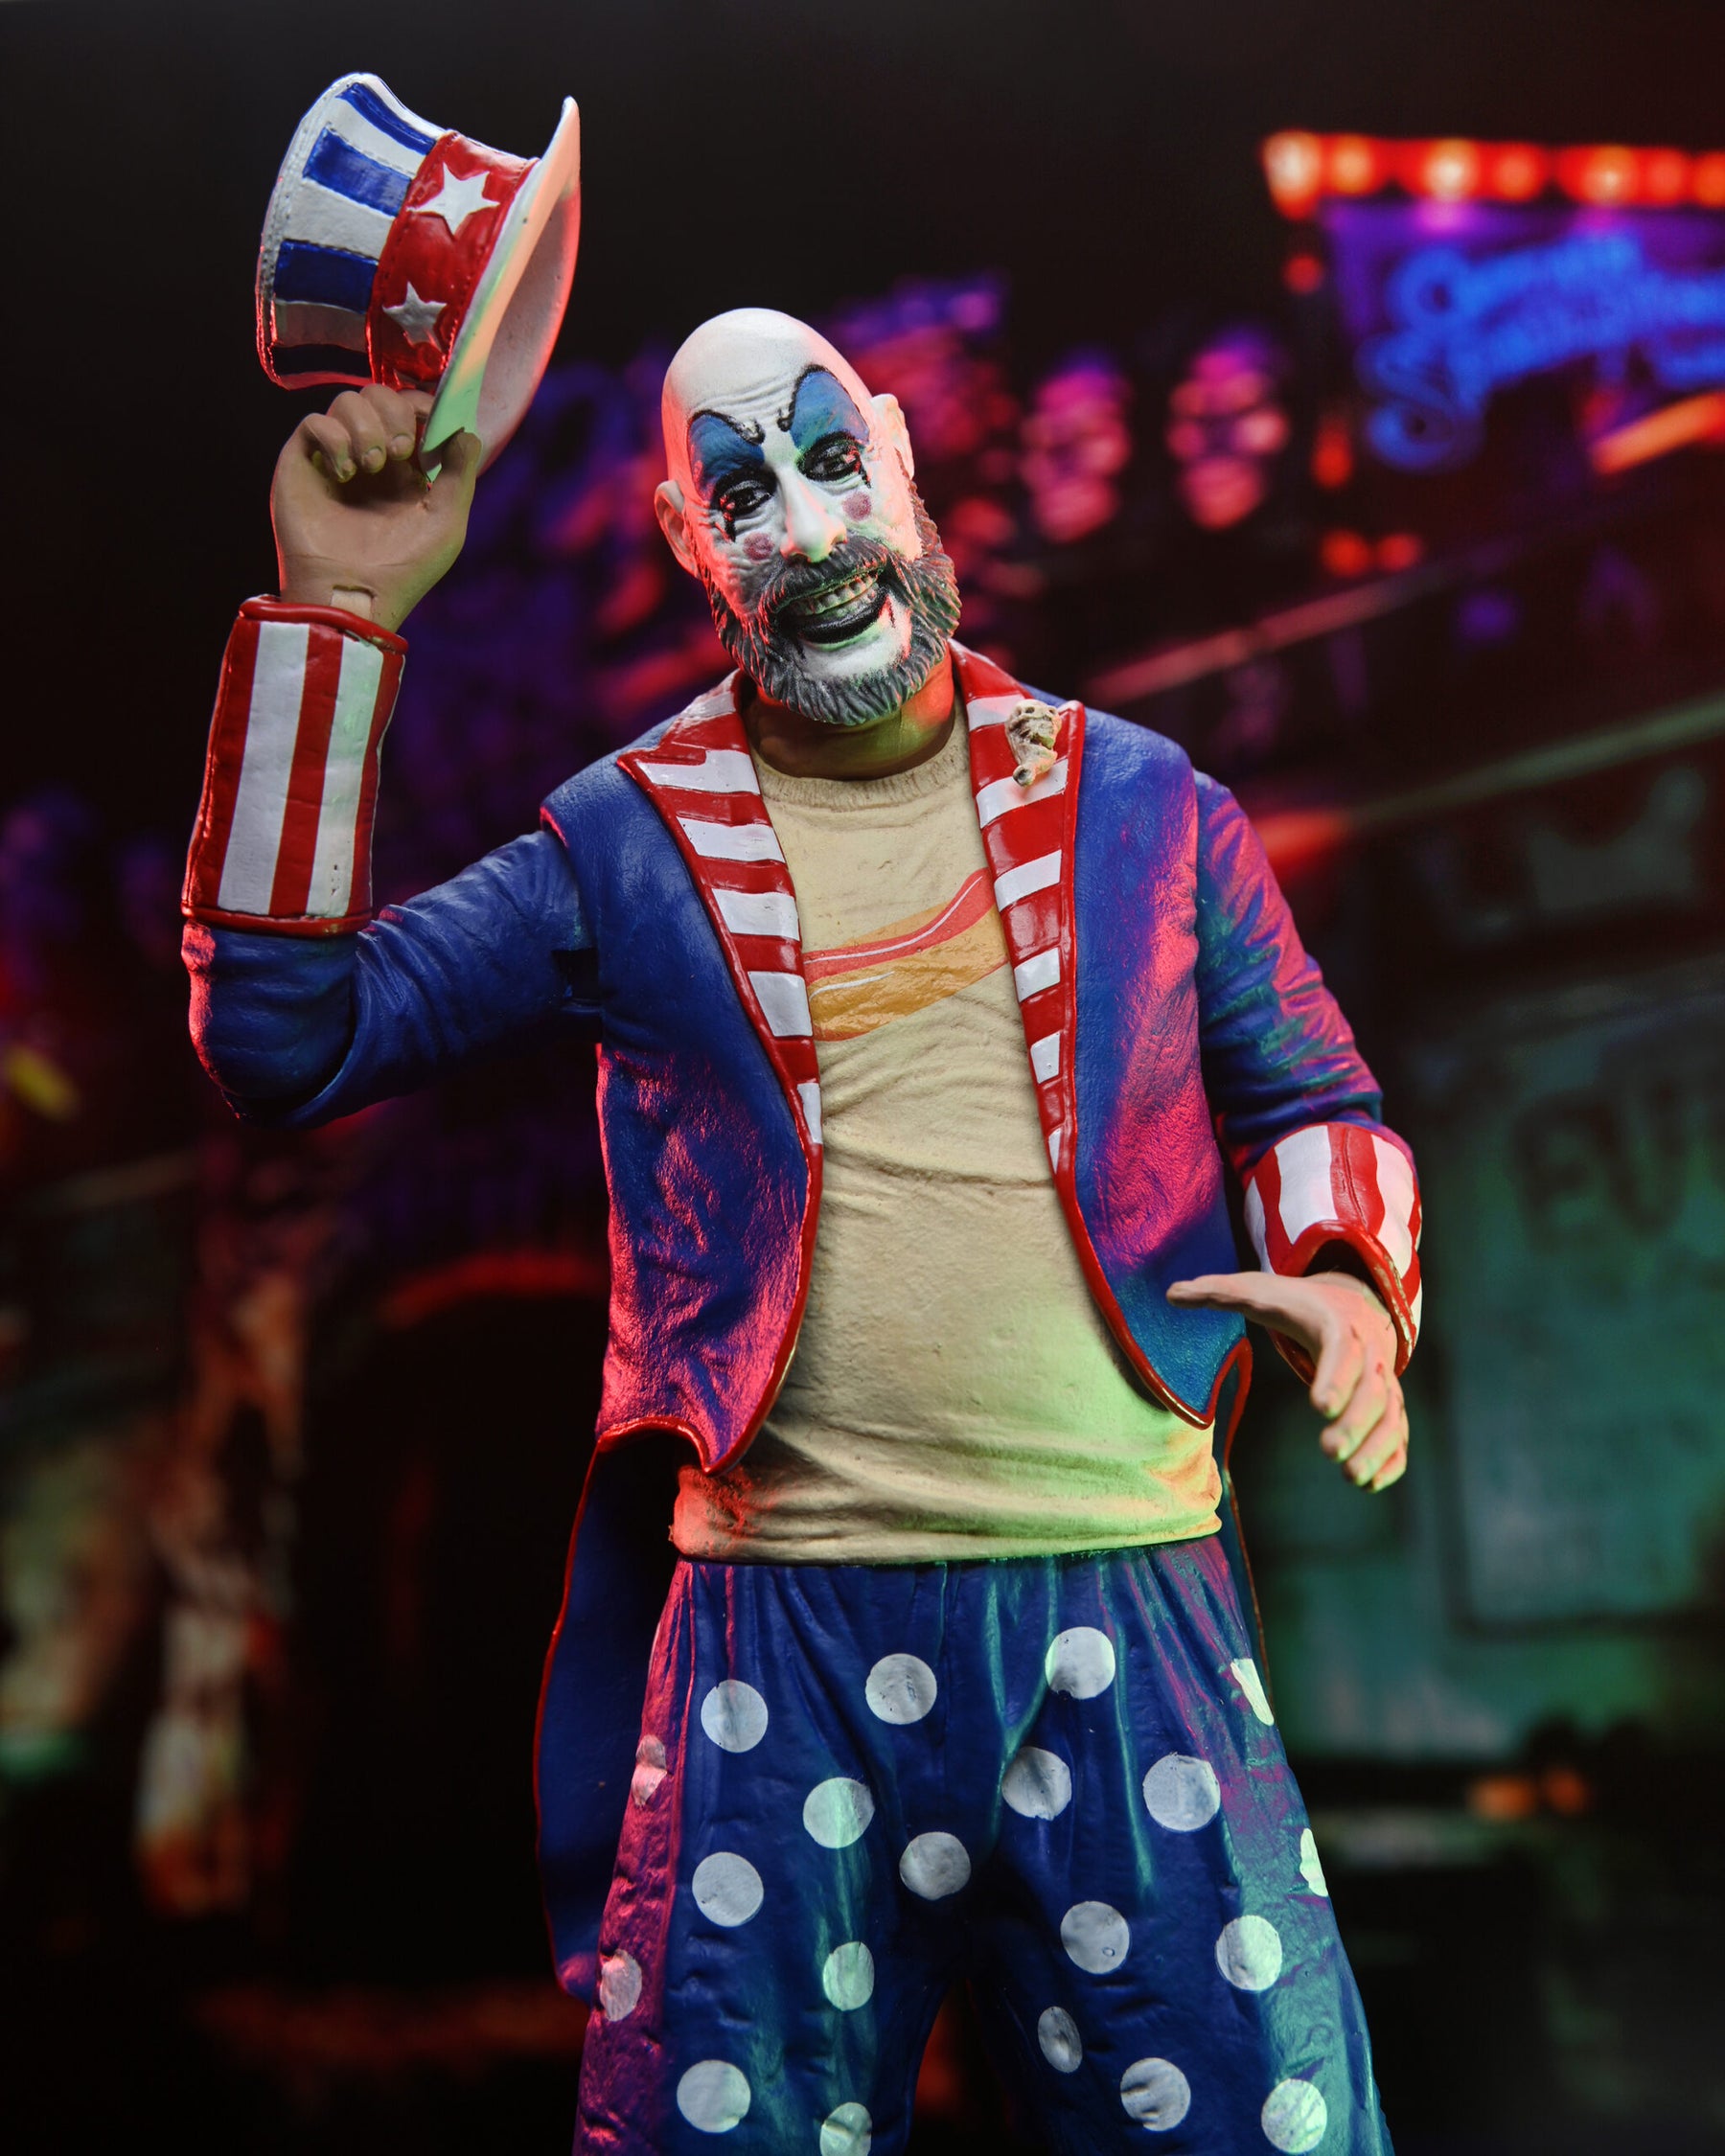 NECA - House of 1000 Corpses - Ultimate  Captain Spaulding (Tailcoat) 20th Anniversary 7” Action Figure Set (Pre-Order Ships March)